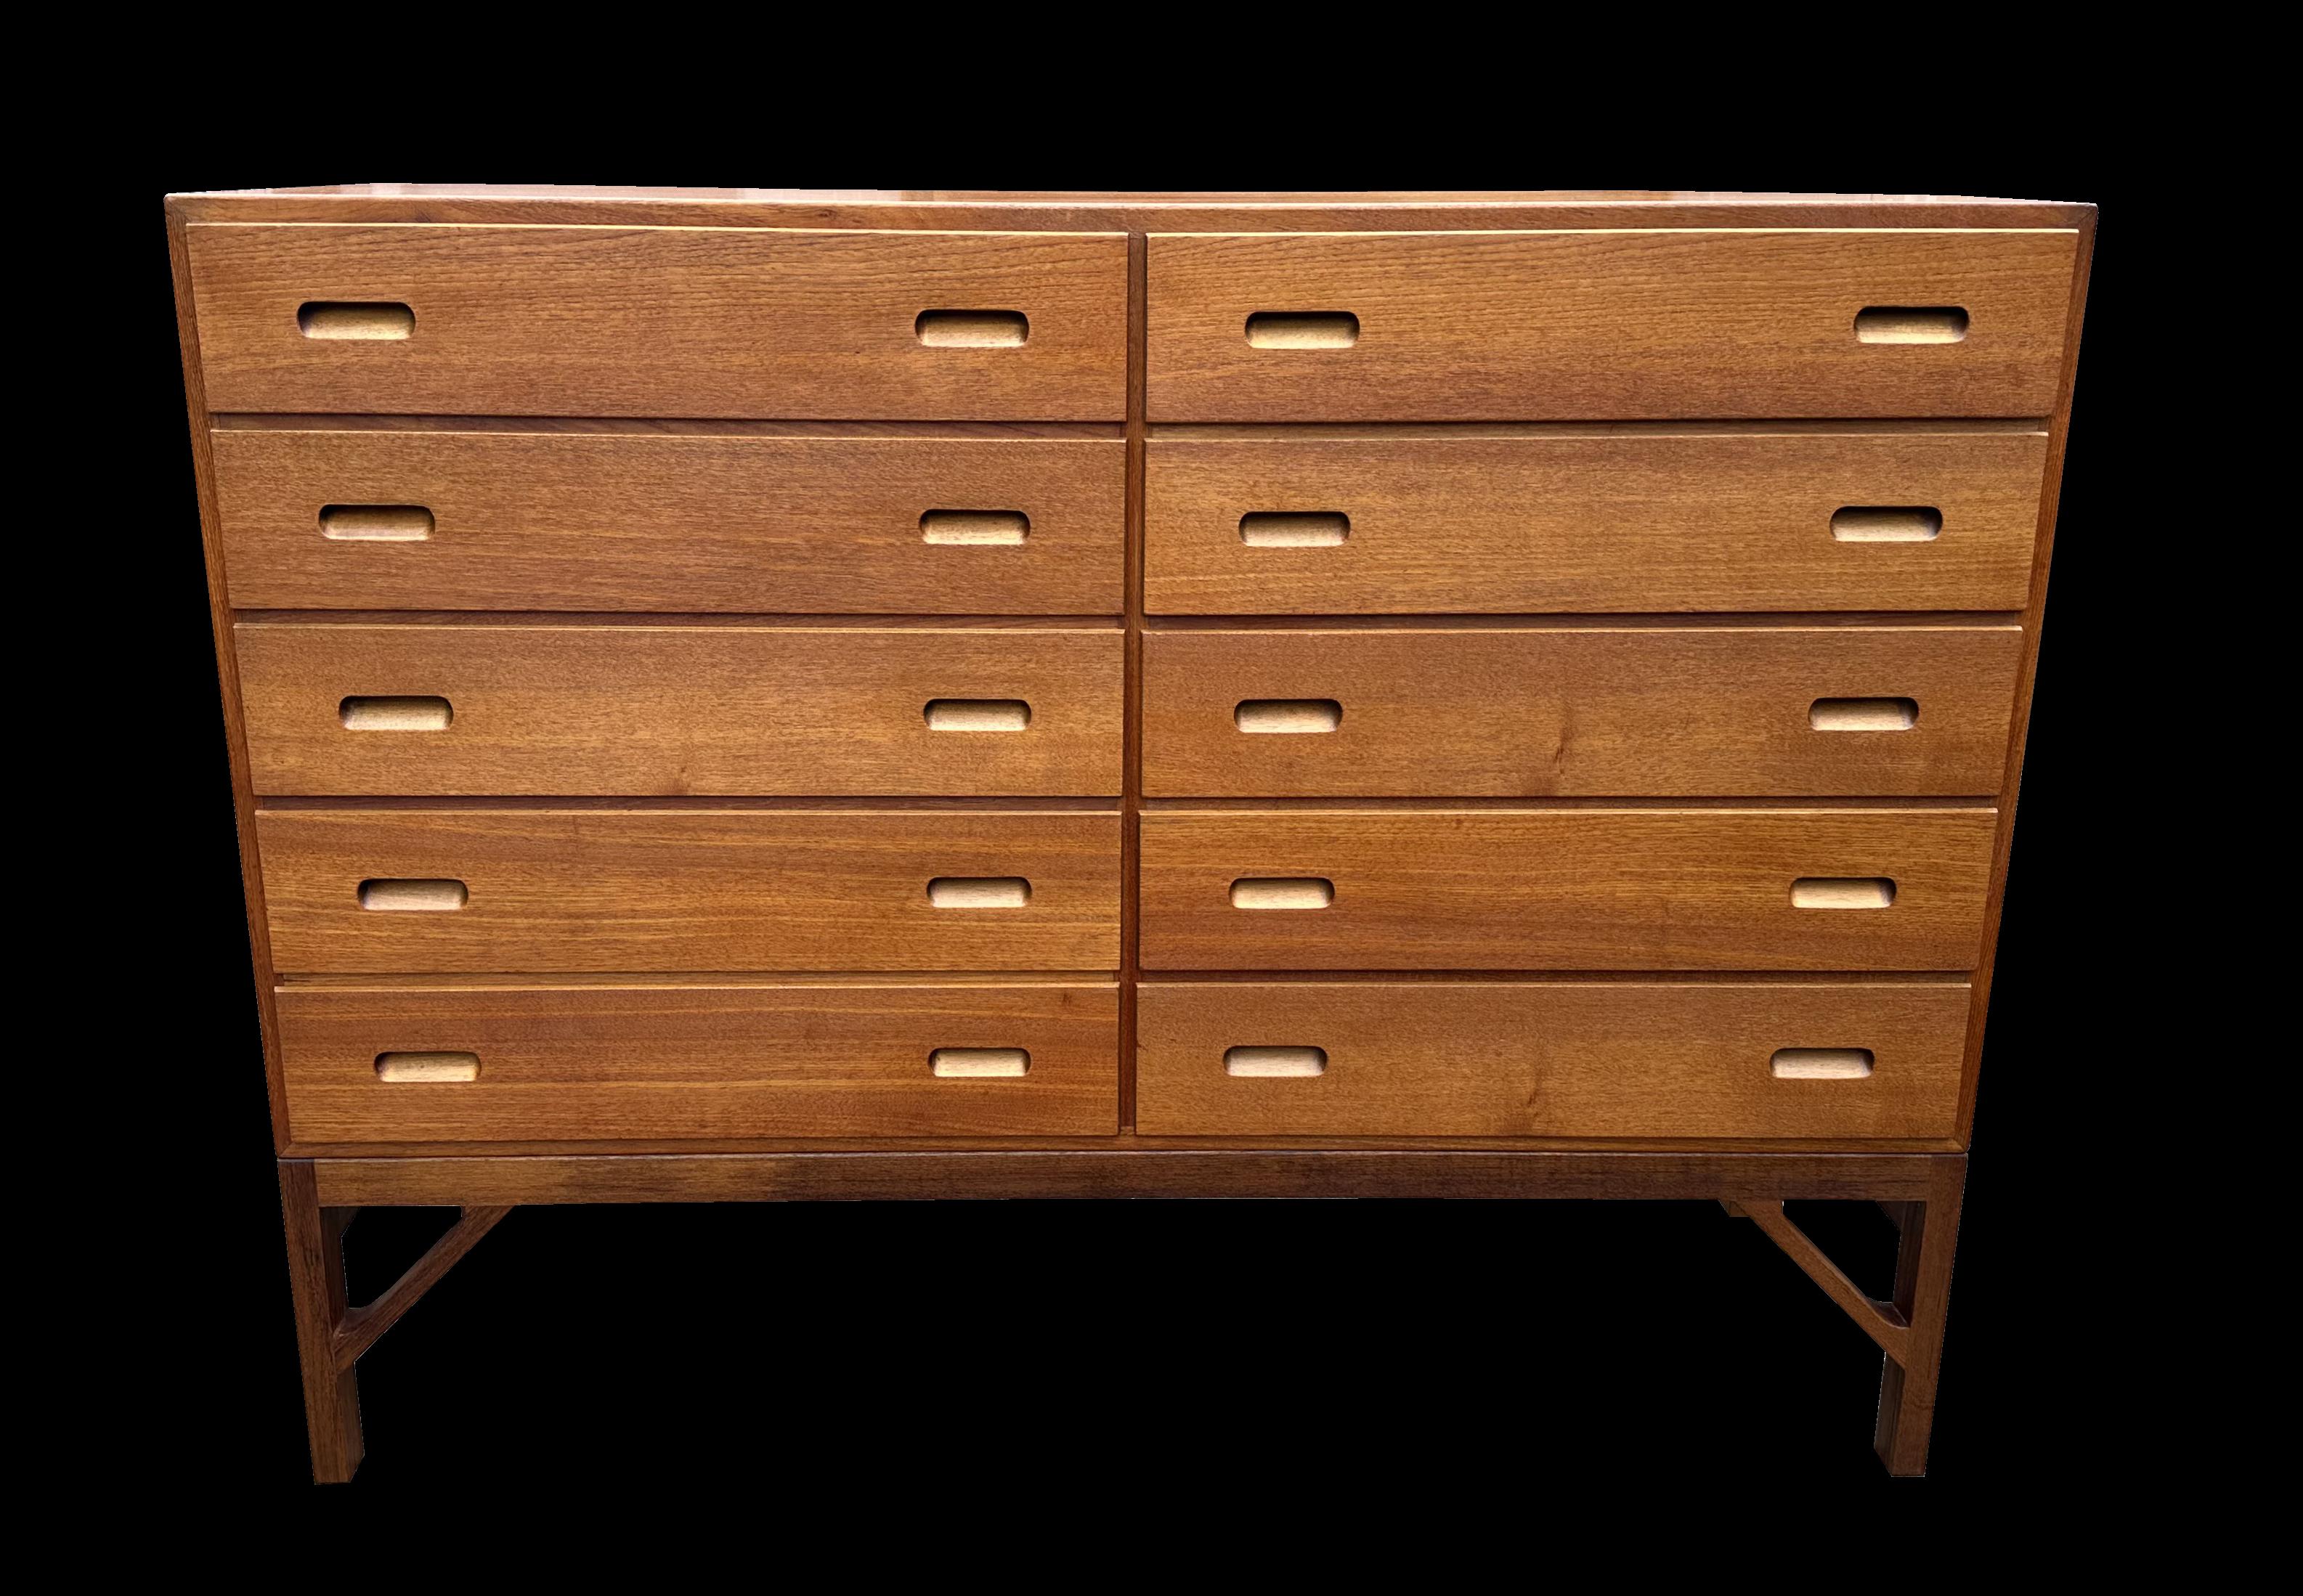 10 Drawer Teak Chest by Borge Mogensen for FDB Mobler In Good Condition For Sale In Little Burstead, Essex